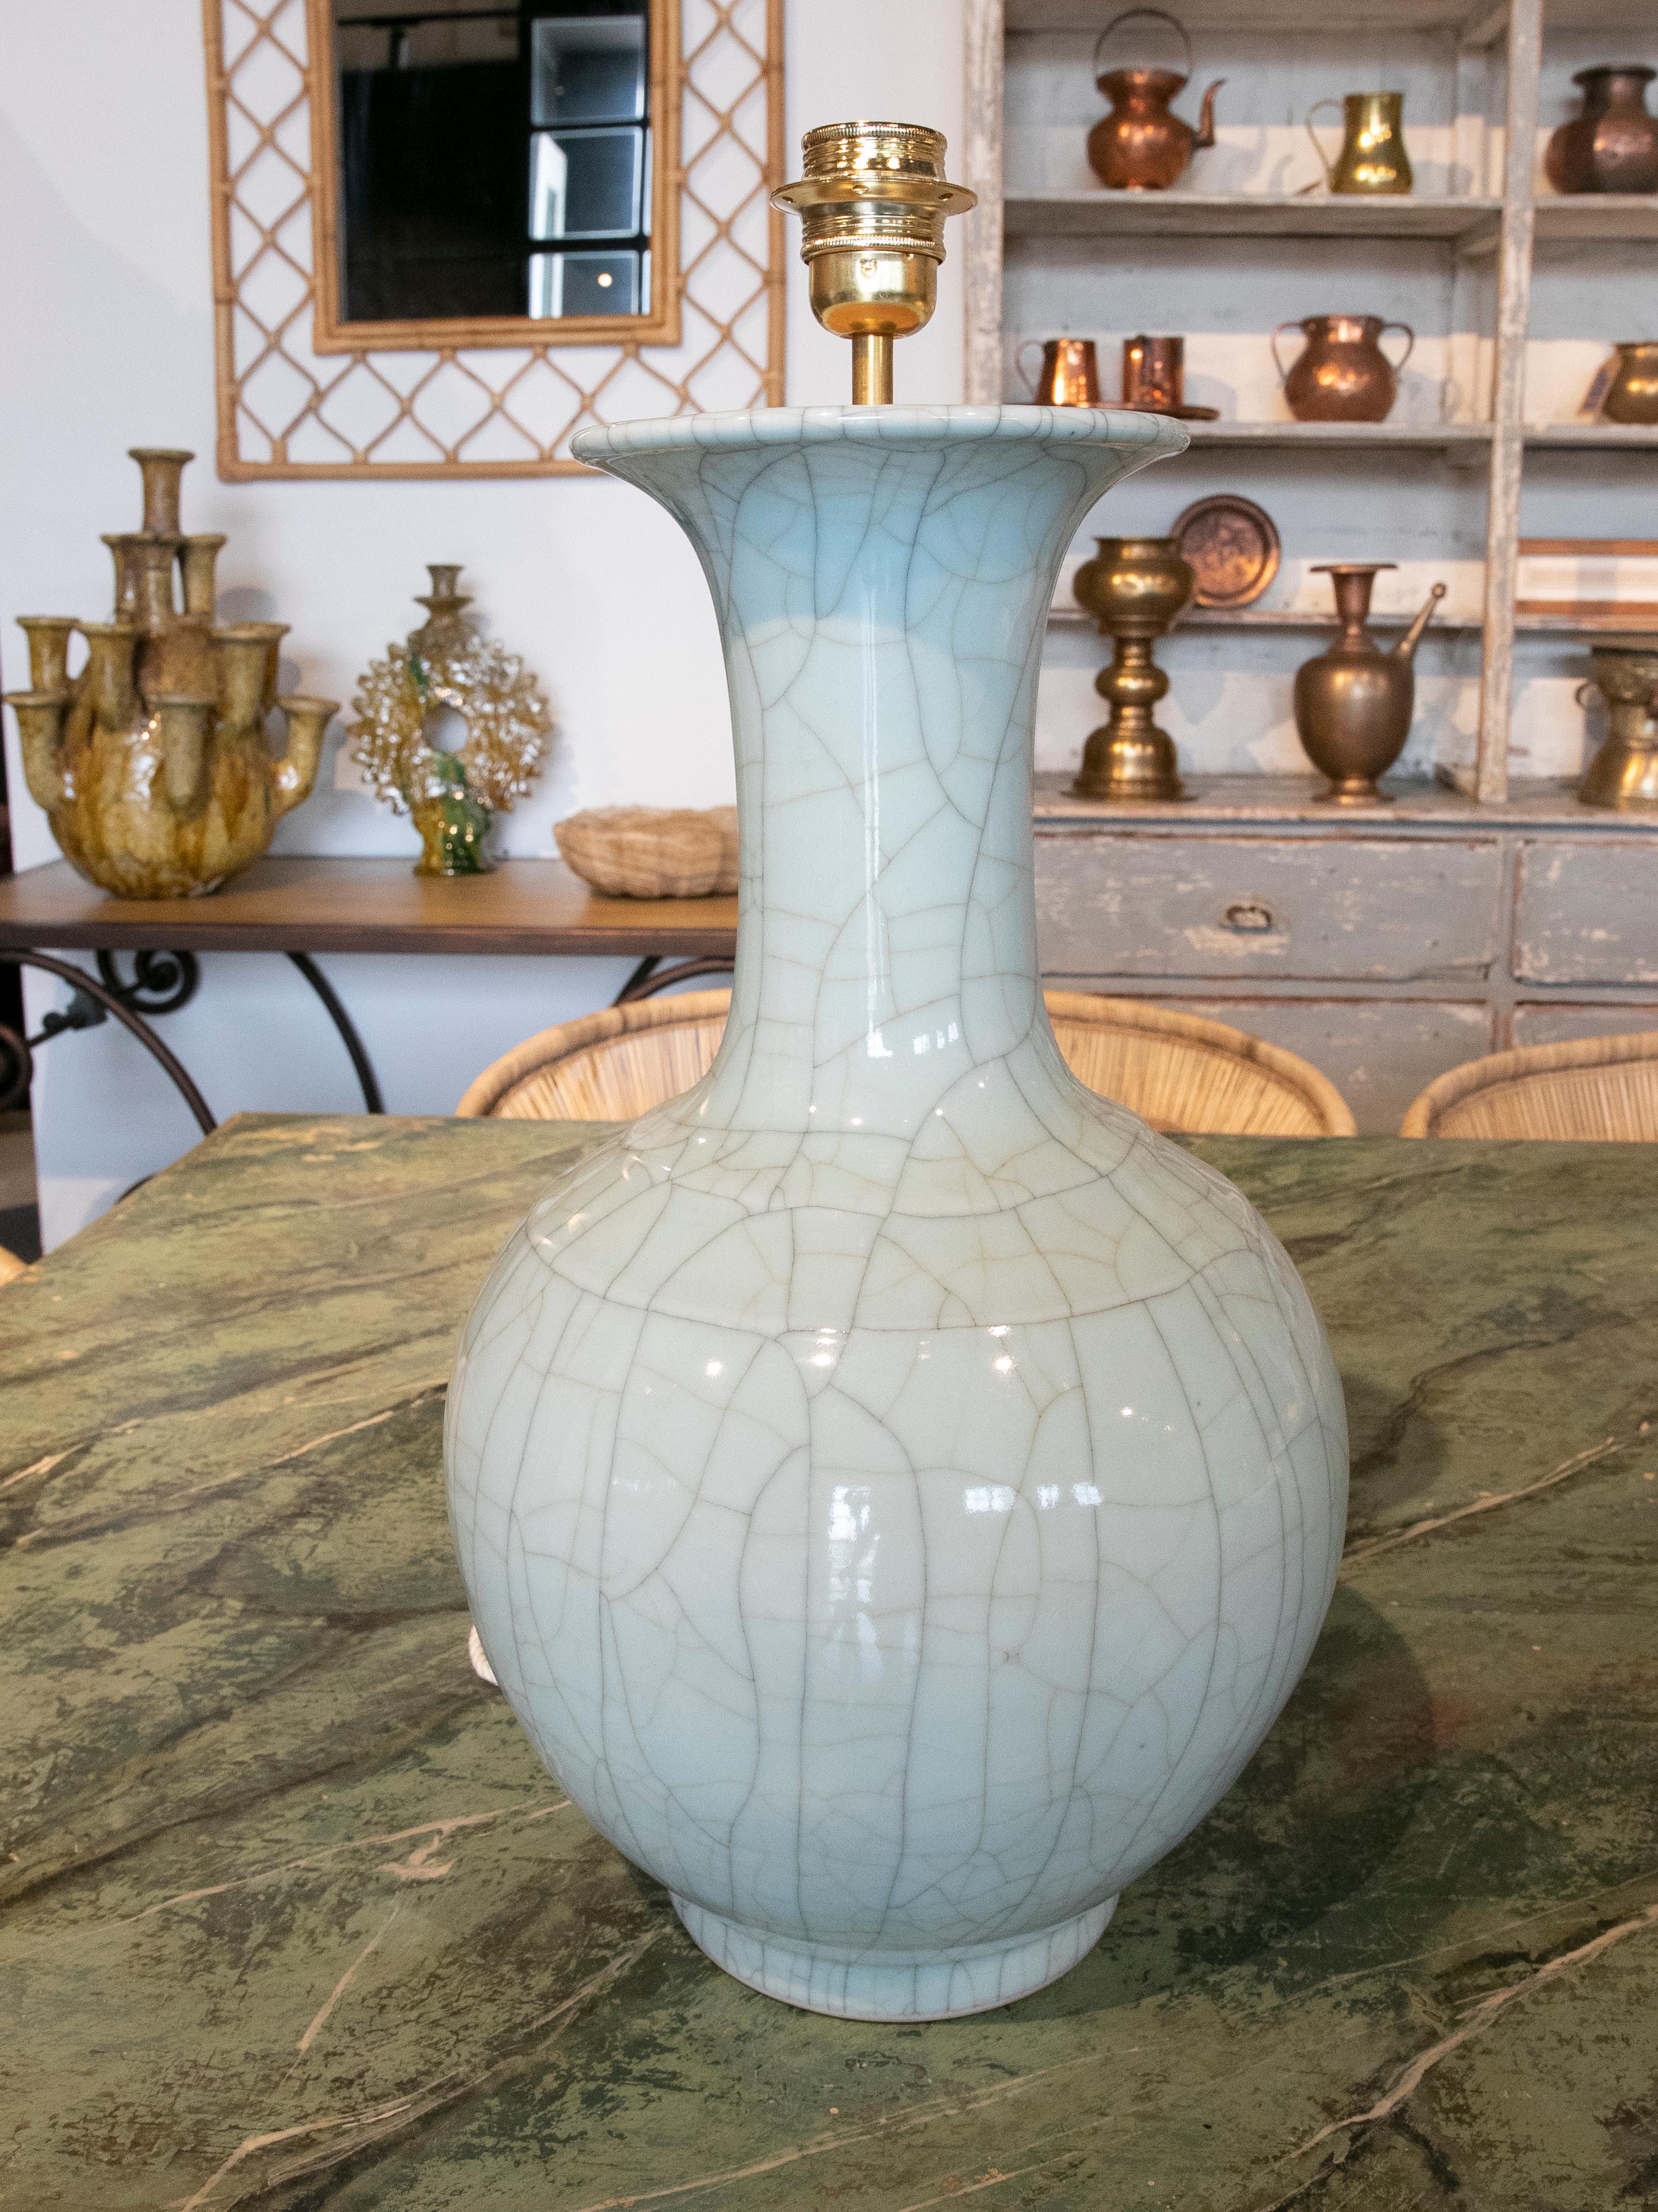 Pair of Green Glazed porcelain lamps with Crackled Finish.